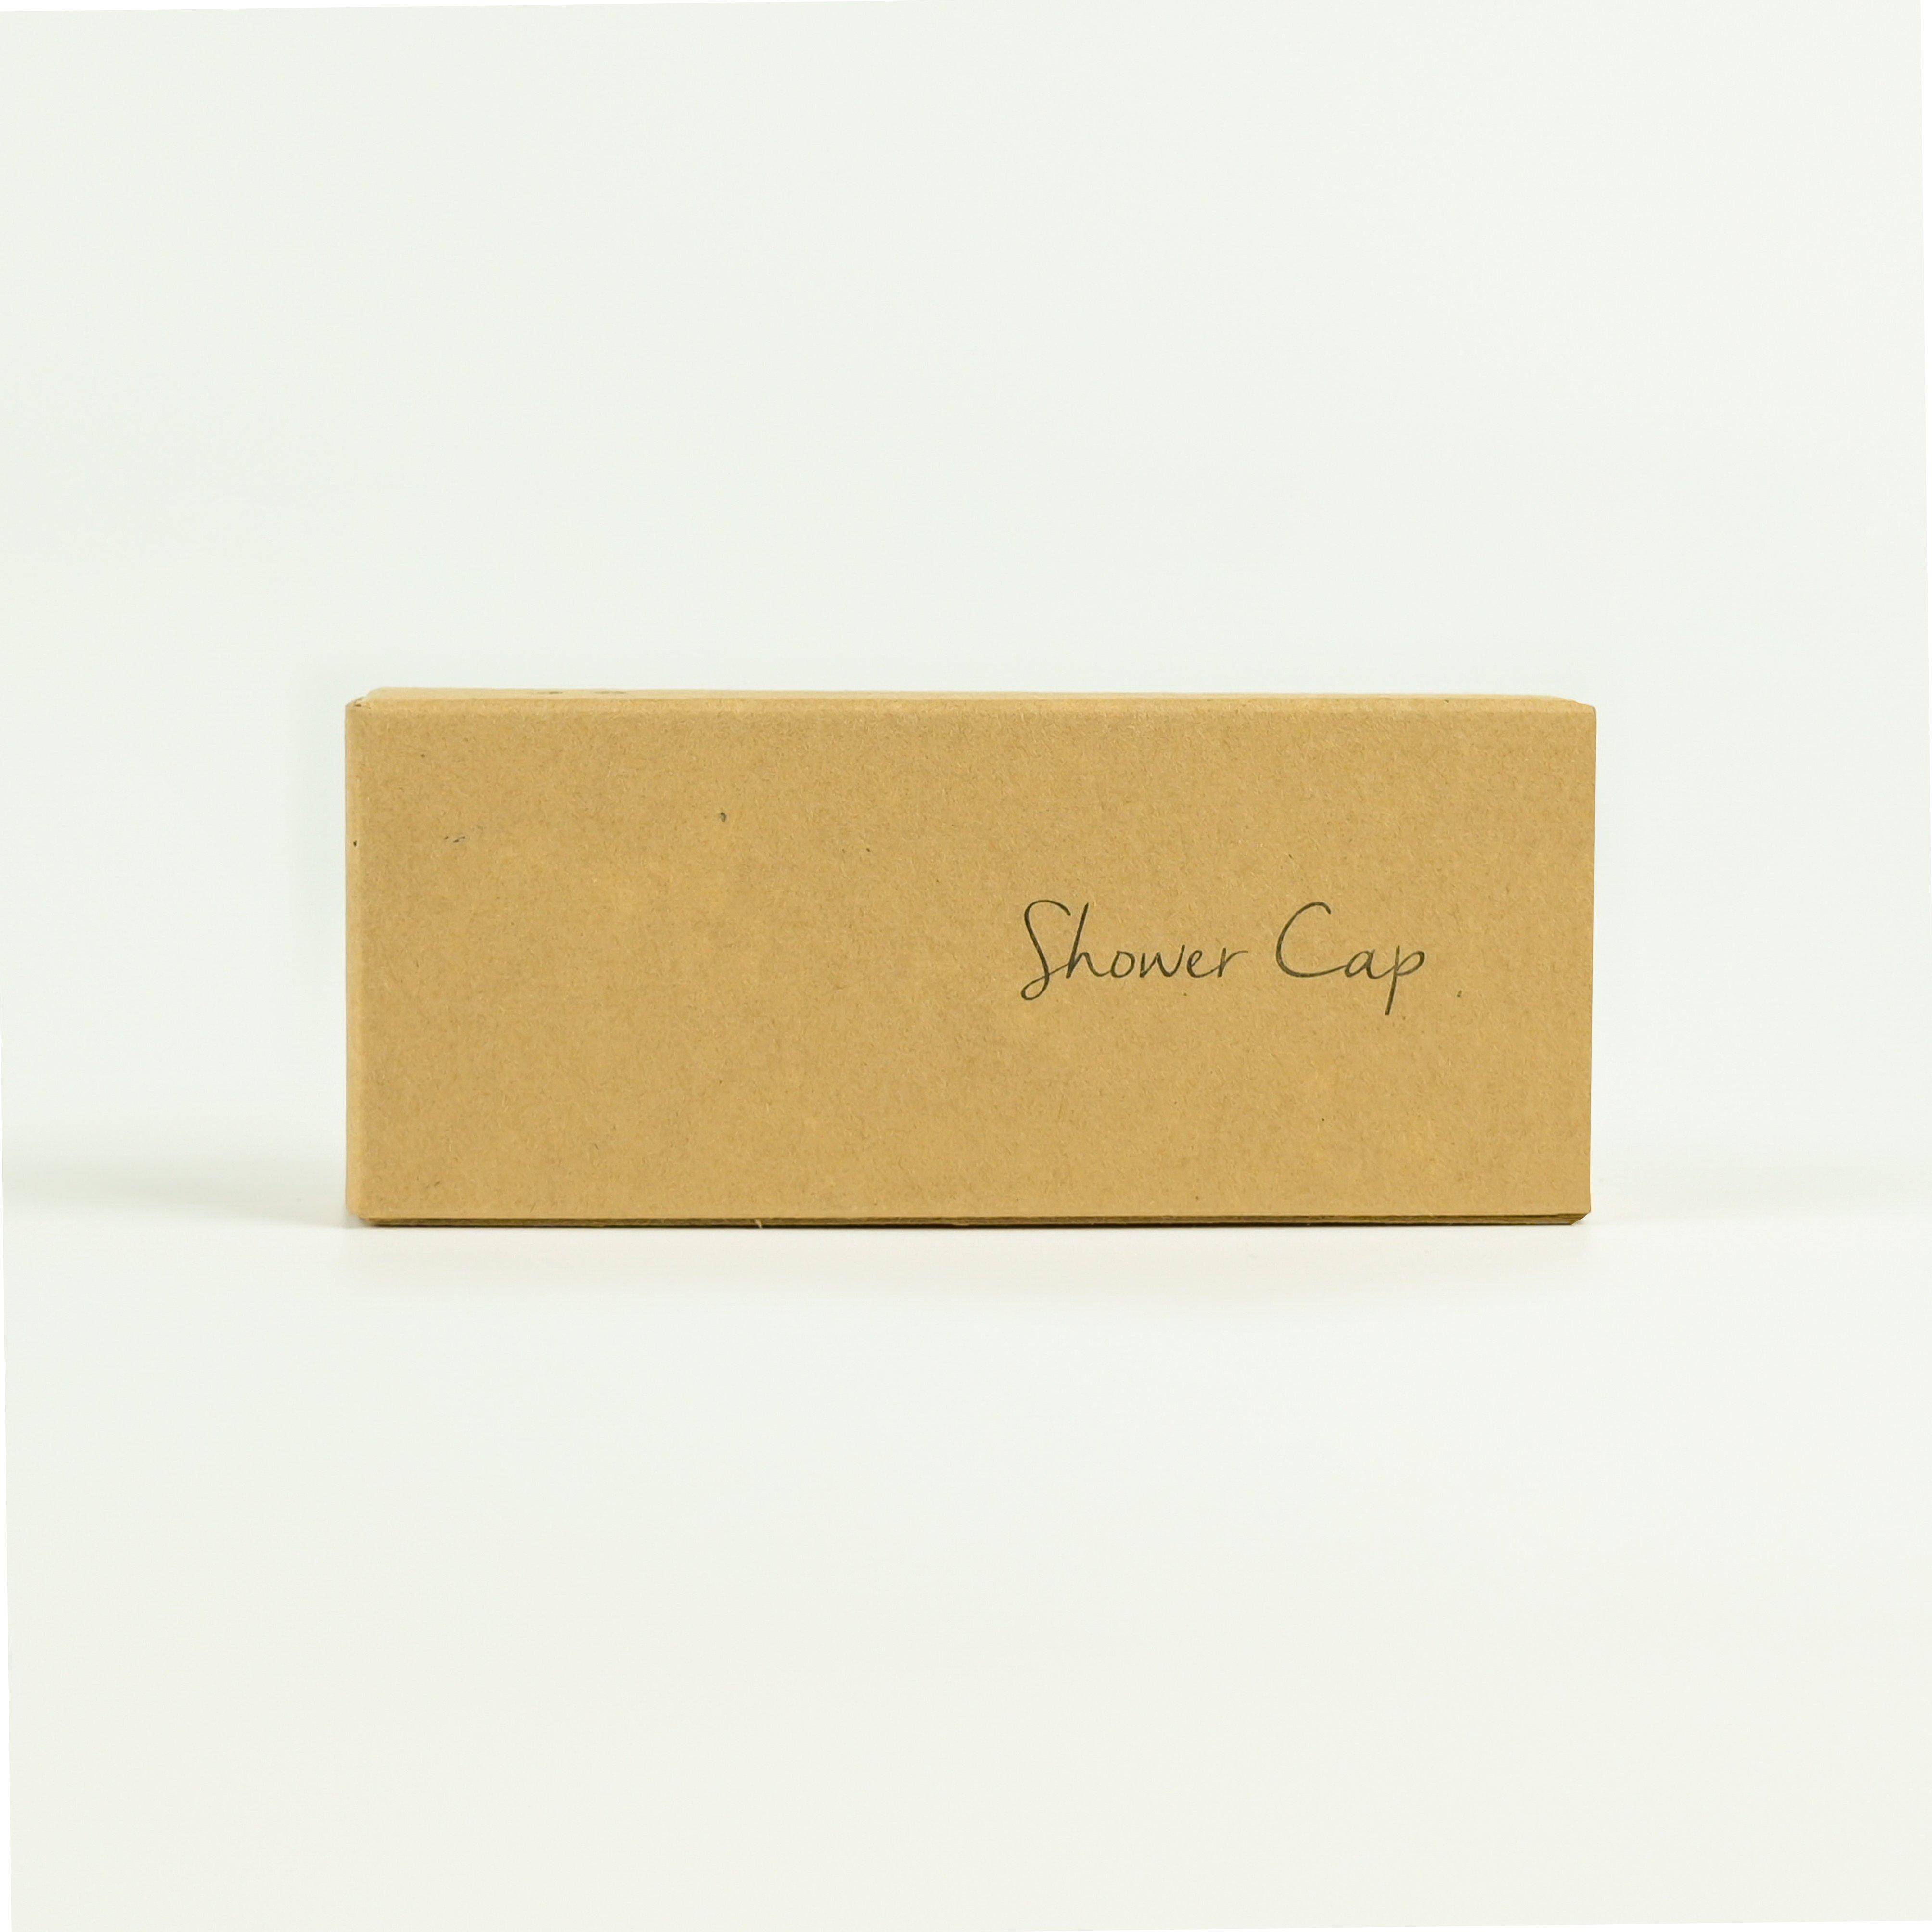 Disposable Shower Cap in Recycled Kraft Box